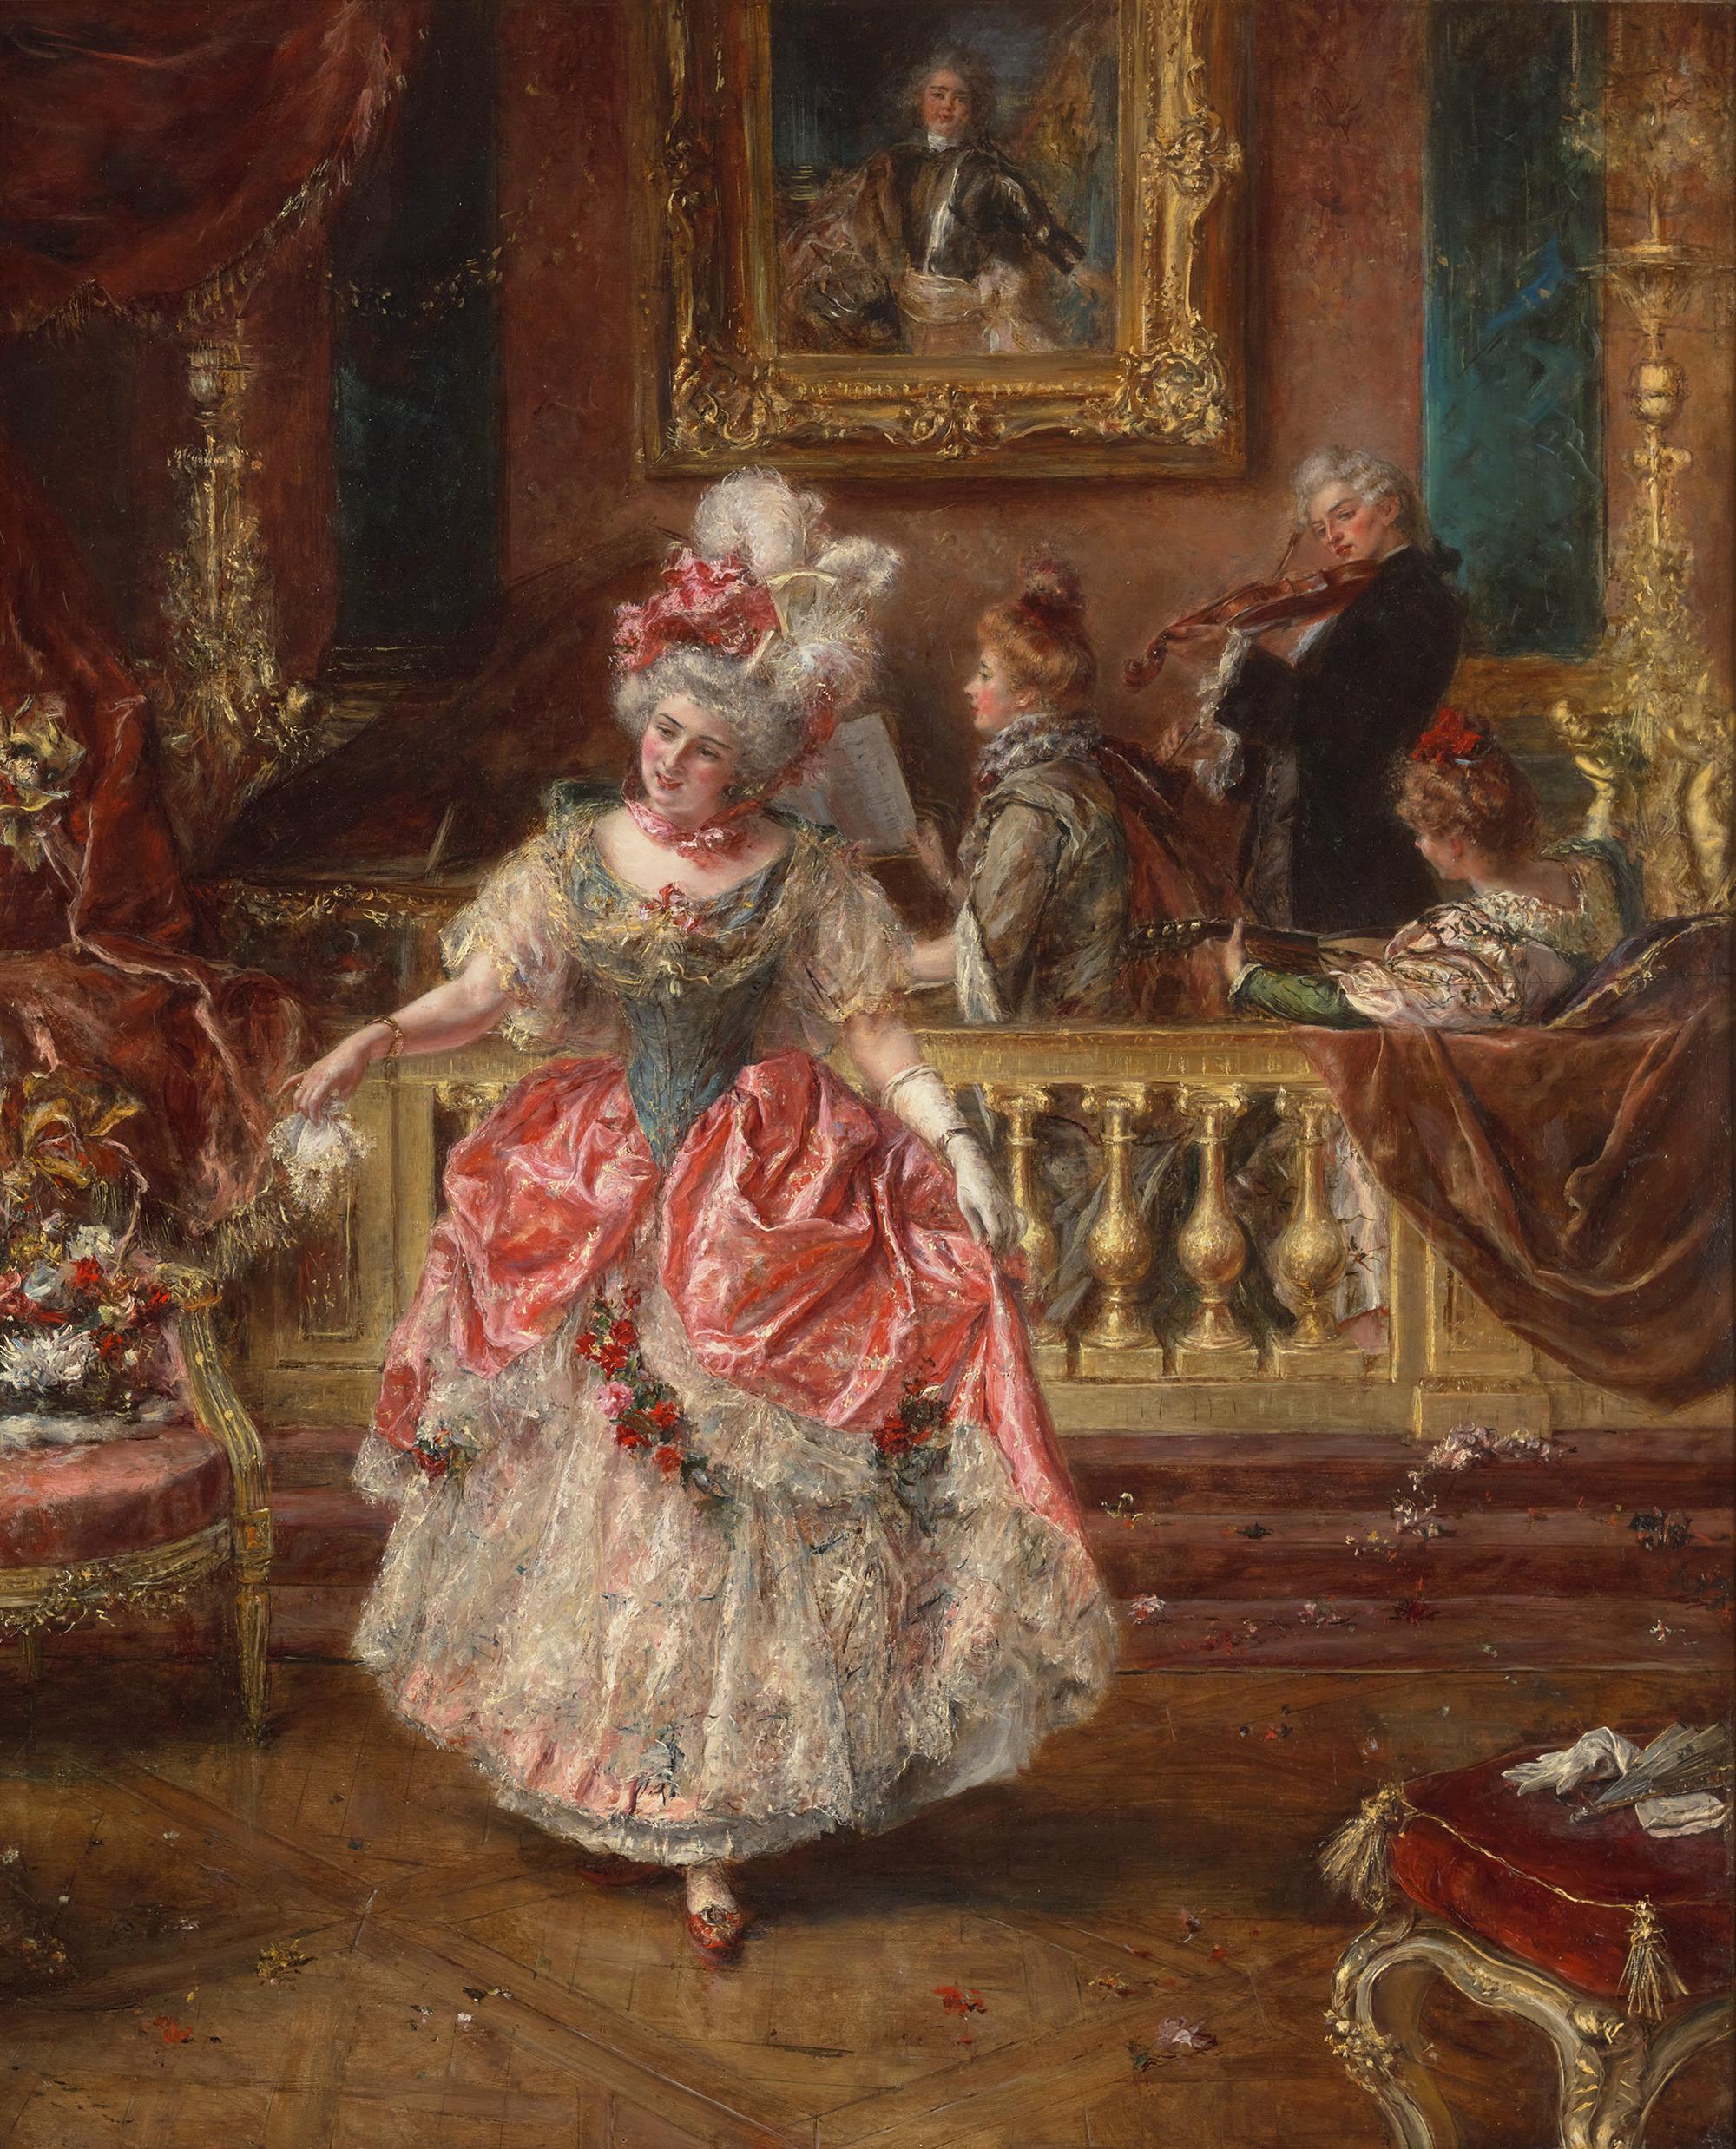 Eduardo Léon Garrido
1856-1949  Spanish

At the Ball

Signed “E.L. Garrido” (lower left)
Oil on panel

This pastel-hued composition was painted by famed Spanish painter Eduardo Léon Garrido. A musical trio adds levity to the atmosphere as an